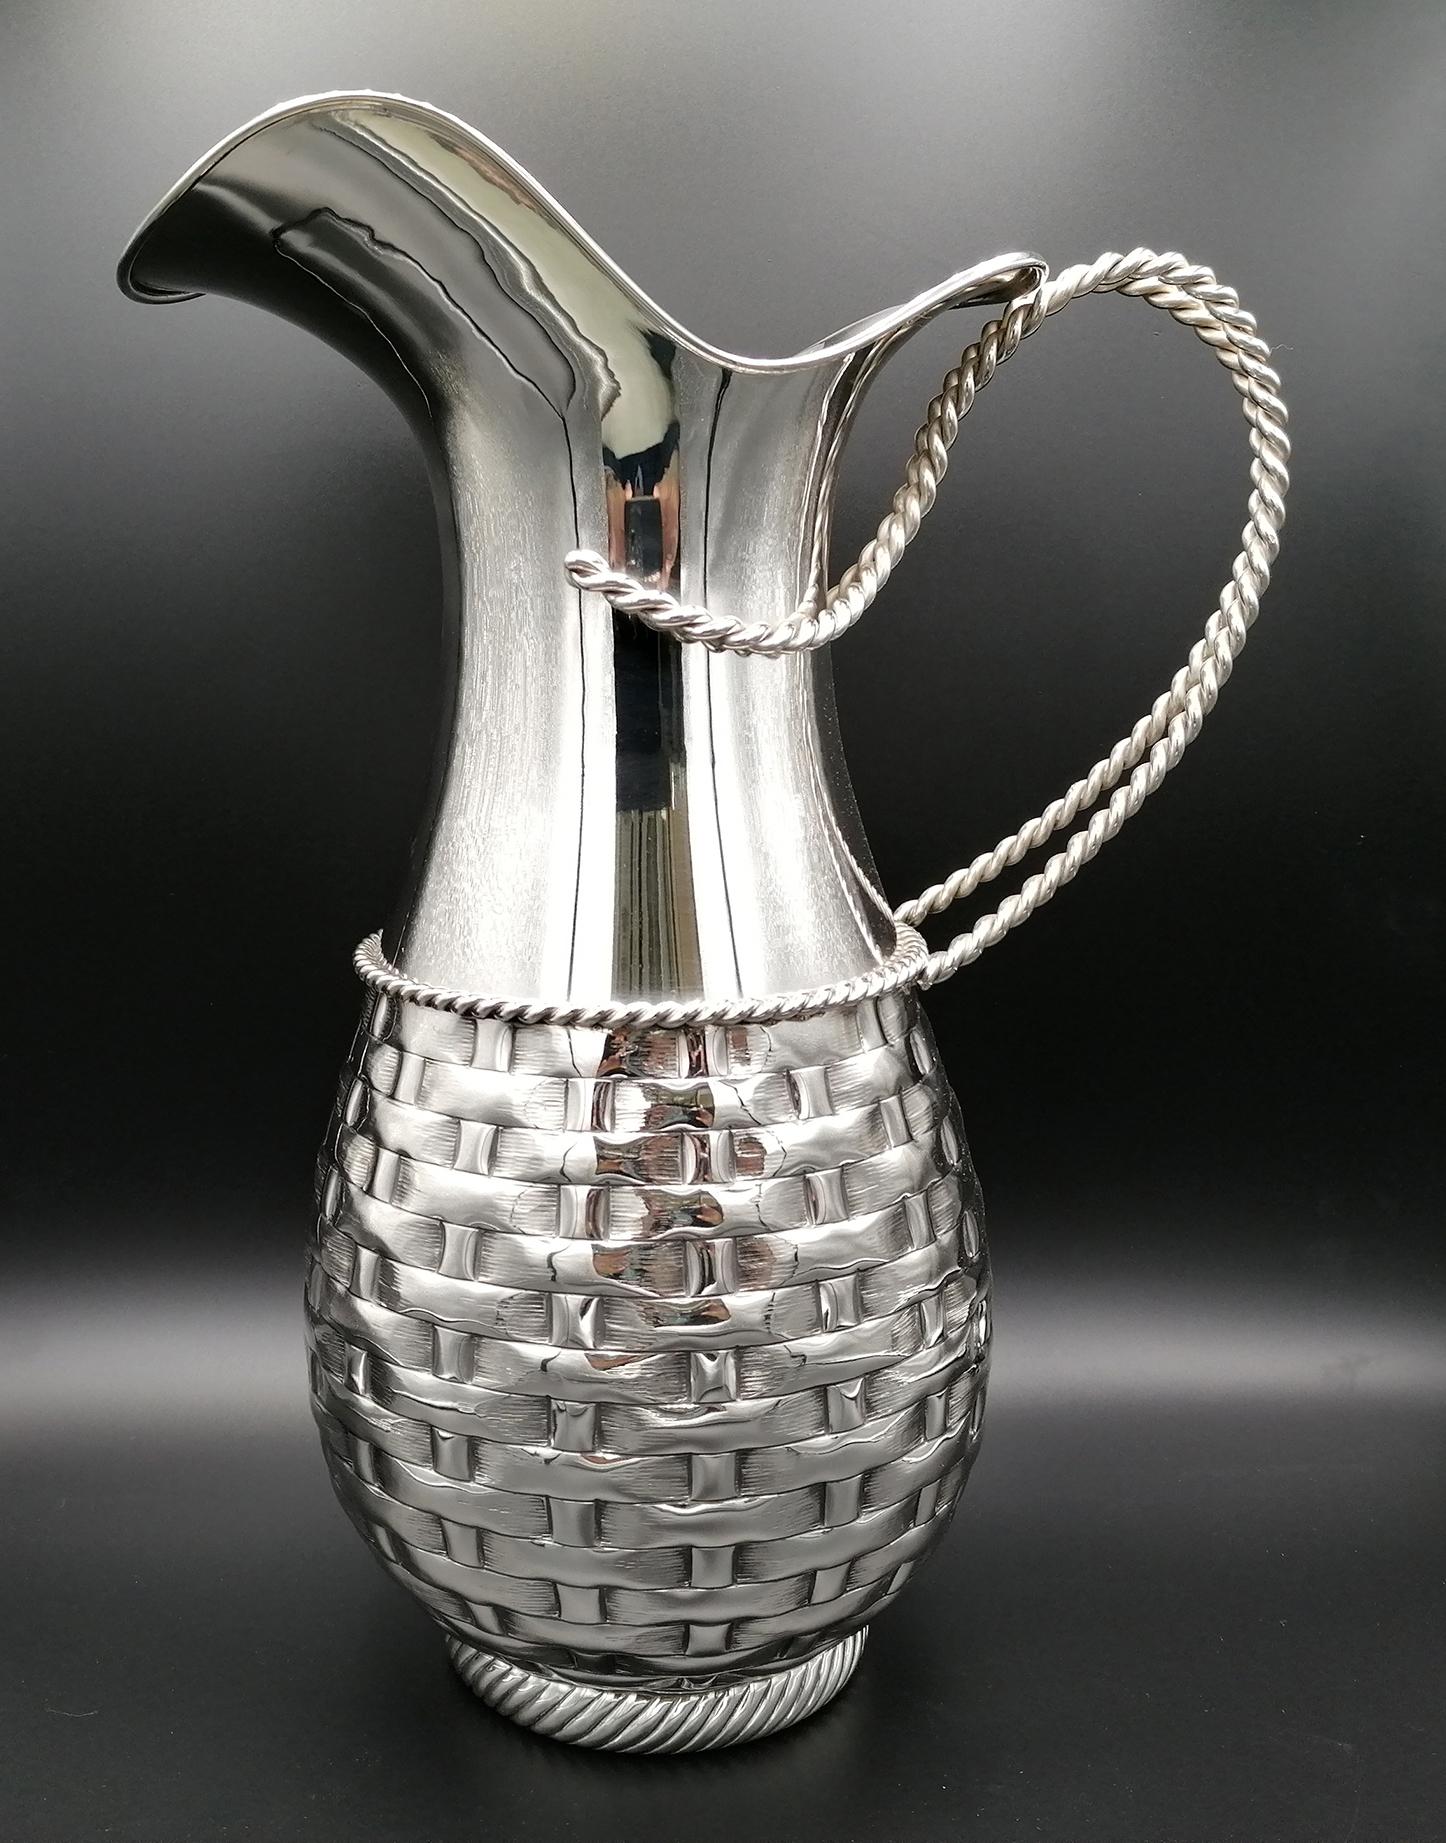 Handmade 800 silver jug. Embossed and chiseled with straw design. The handle and the median frame is a braided cord made from 2 solid silver wires. The base of the jug is chiseled with a torchon design
1670 grams.